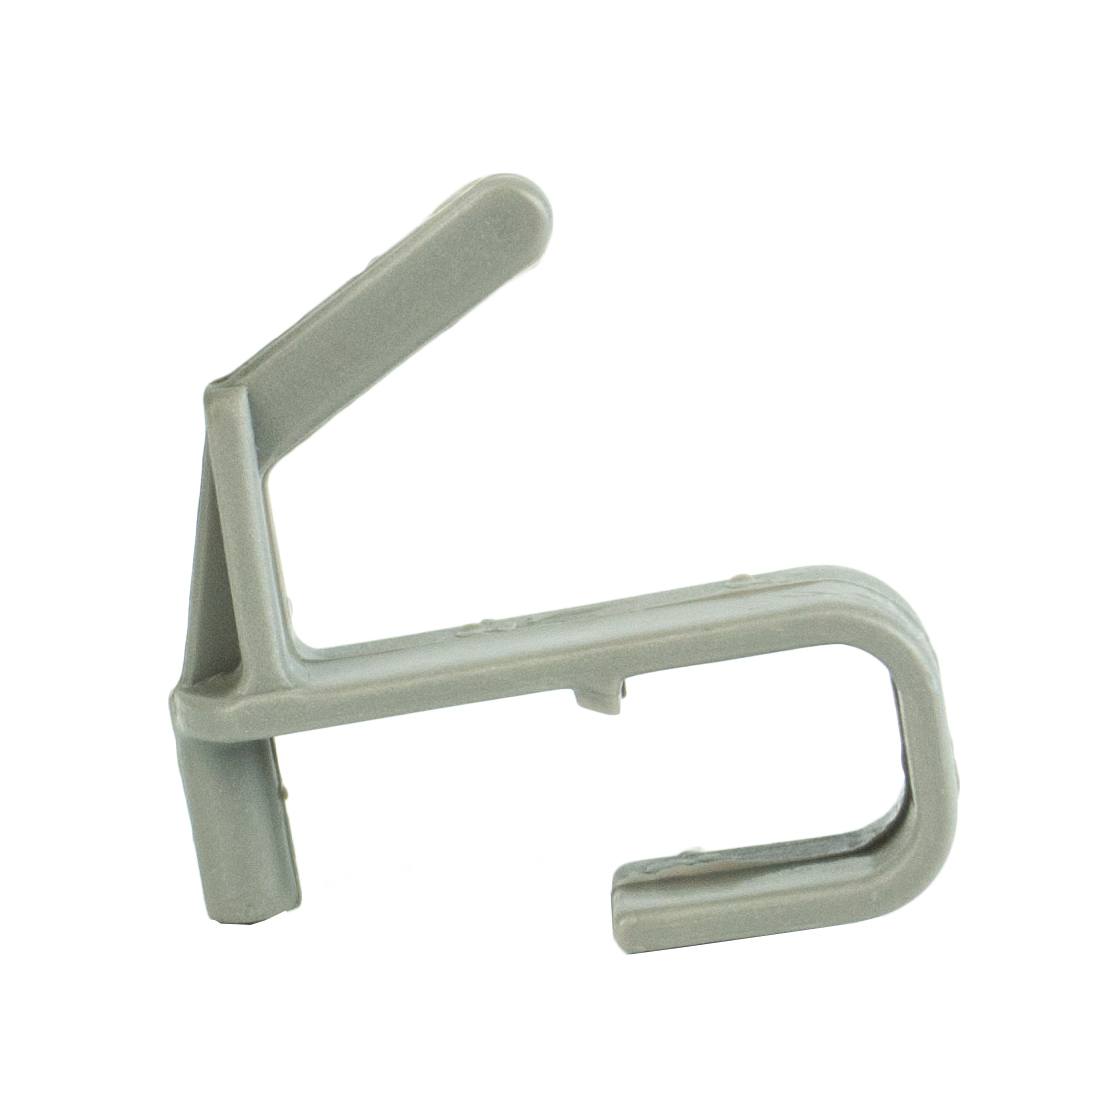 Pulex Small Bucket Clips - Set of Two - Laid on Front Face Right Side View